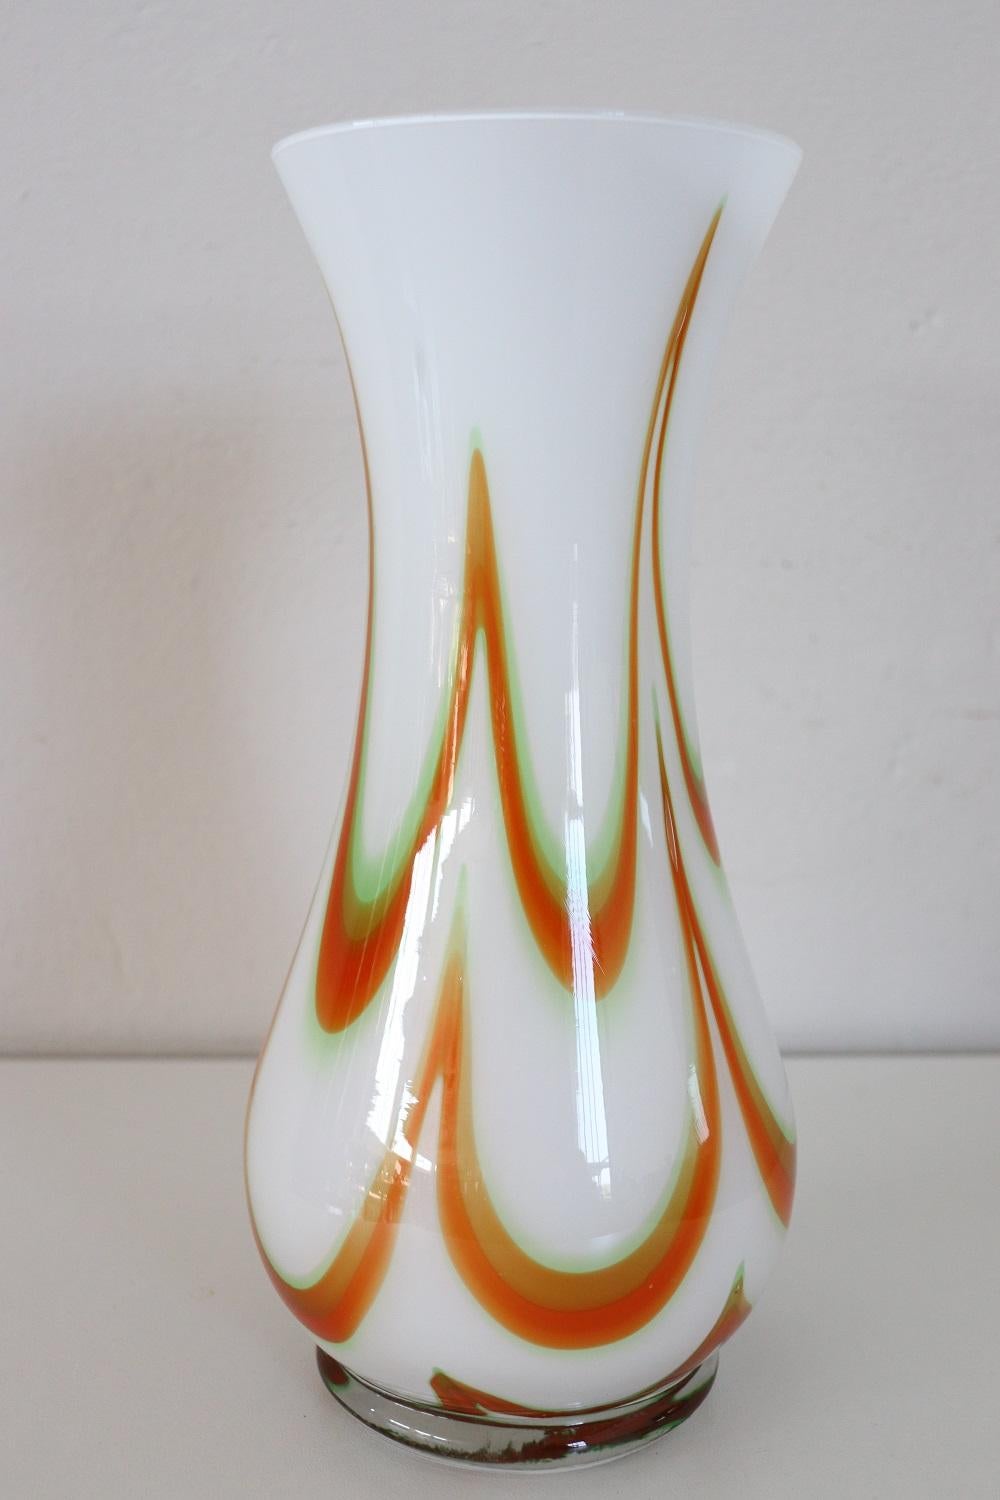 Refined artistic glass vase, Italy, production 1960s Murano. Not signed. High quality artistic in milky white color with a particular decoration reminiscent of kinetic art in the colors of orange. Perfect for an environment with furnishings from the